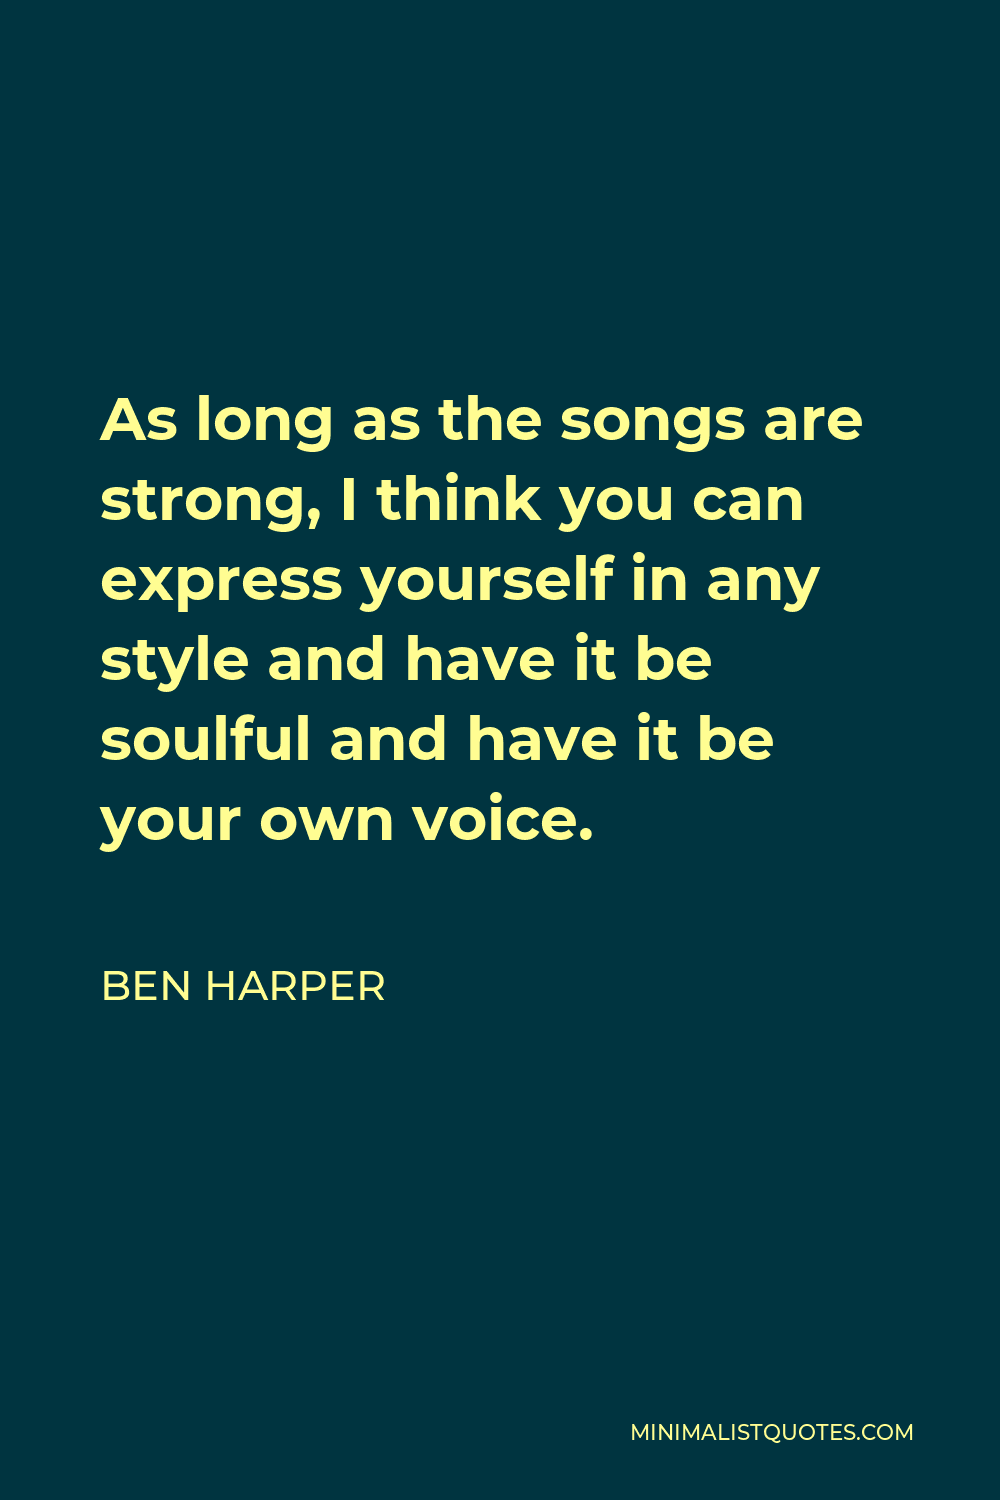 Ben Harper Quote - As long as the songs are strong, I think you can express yourself in any style and have it be soulful and have it be your own voice.